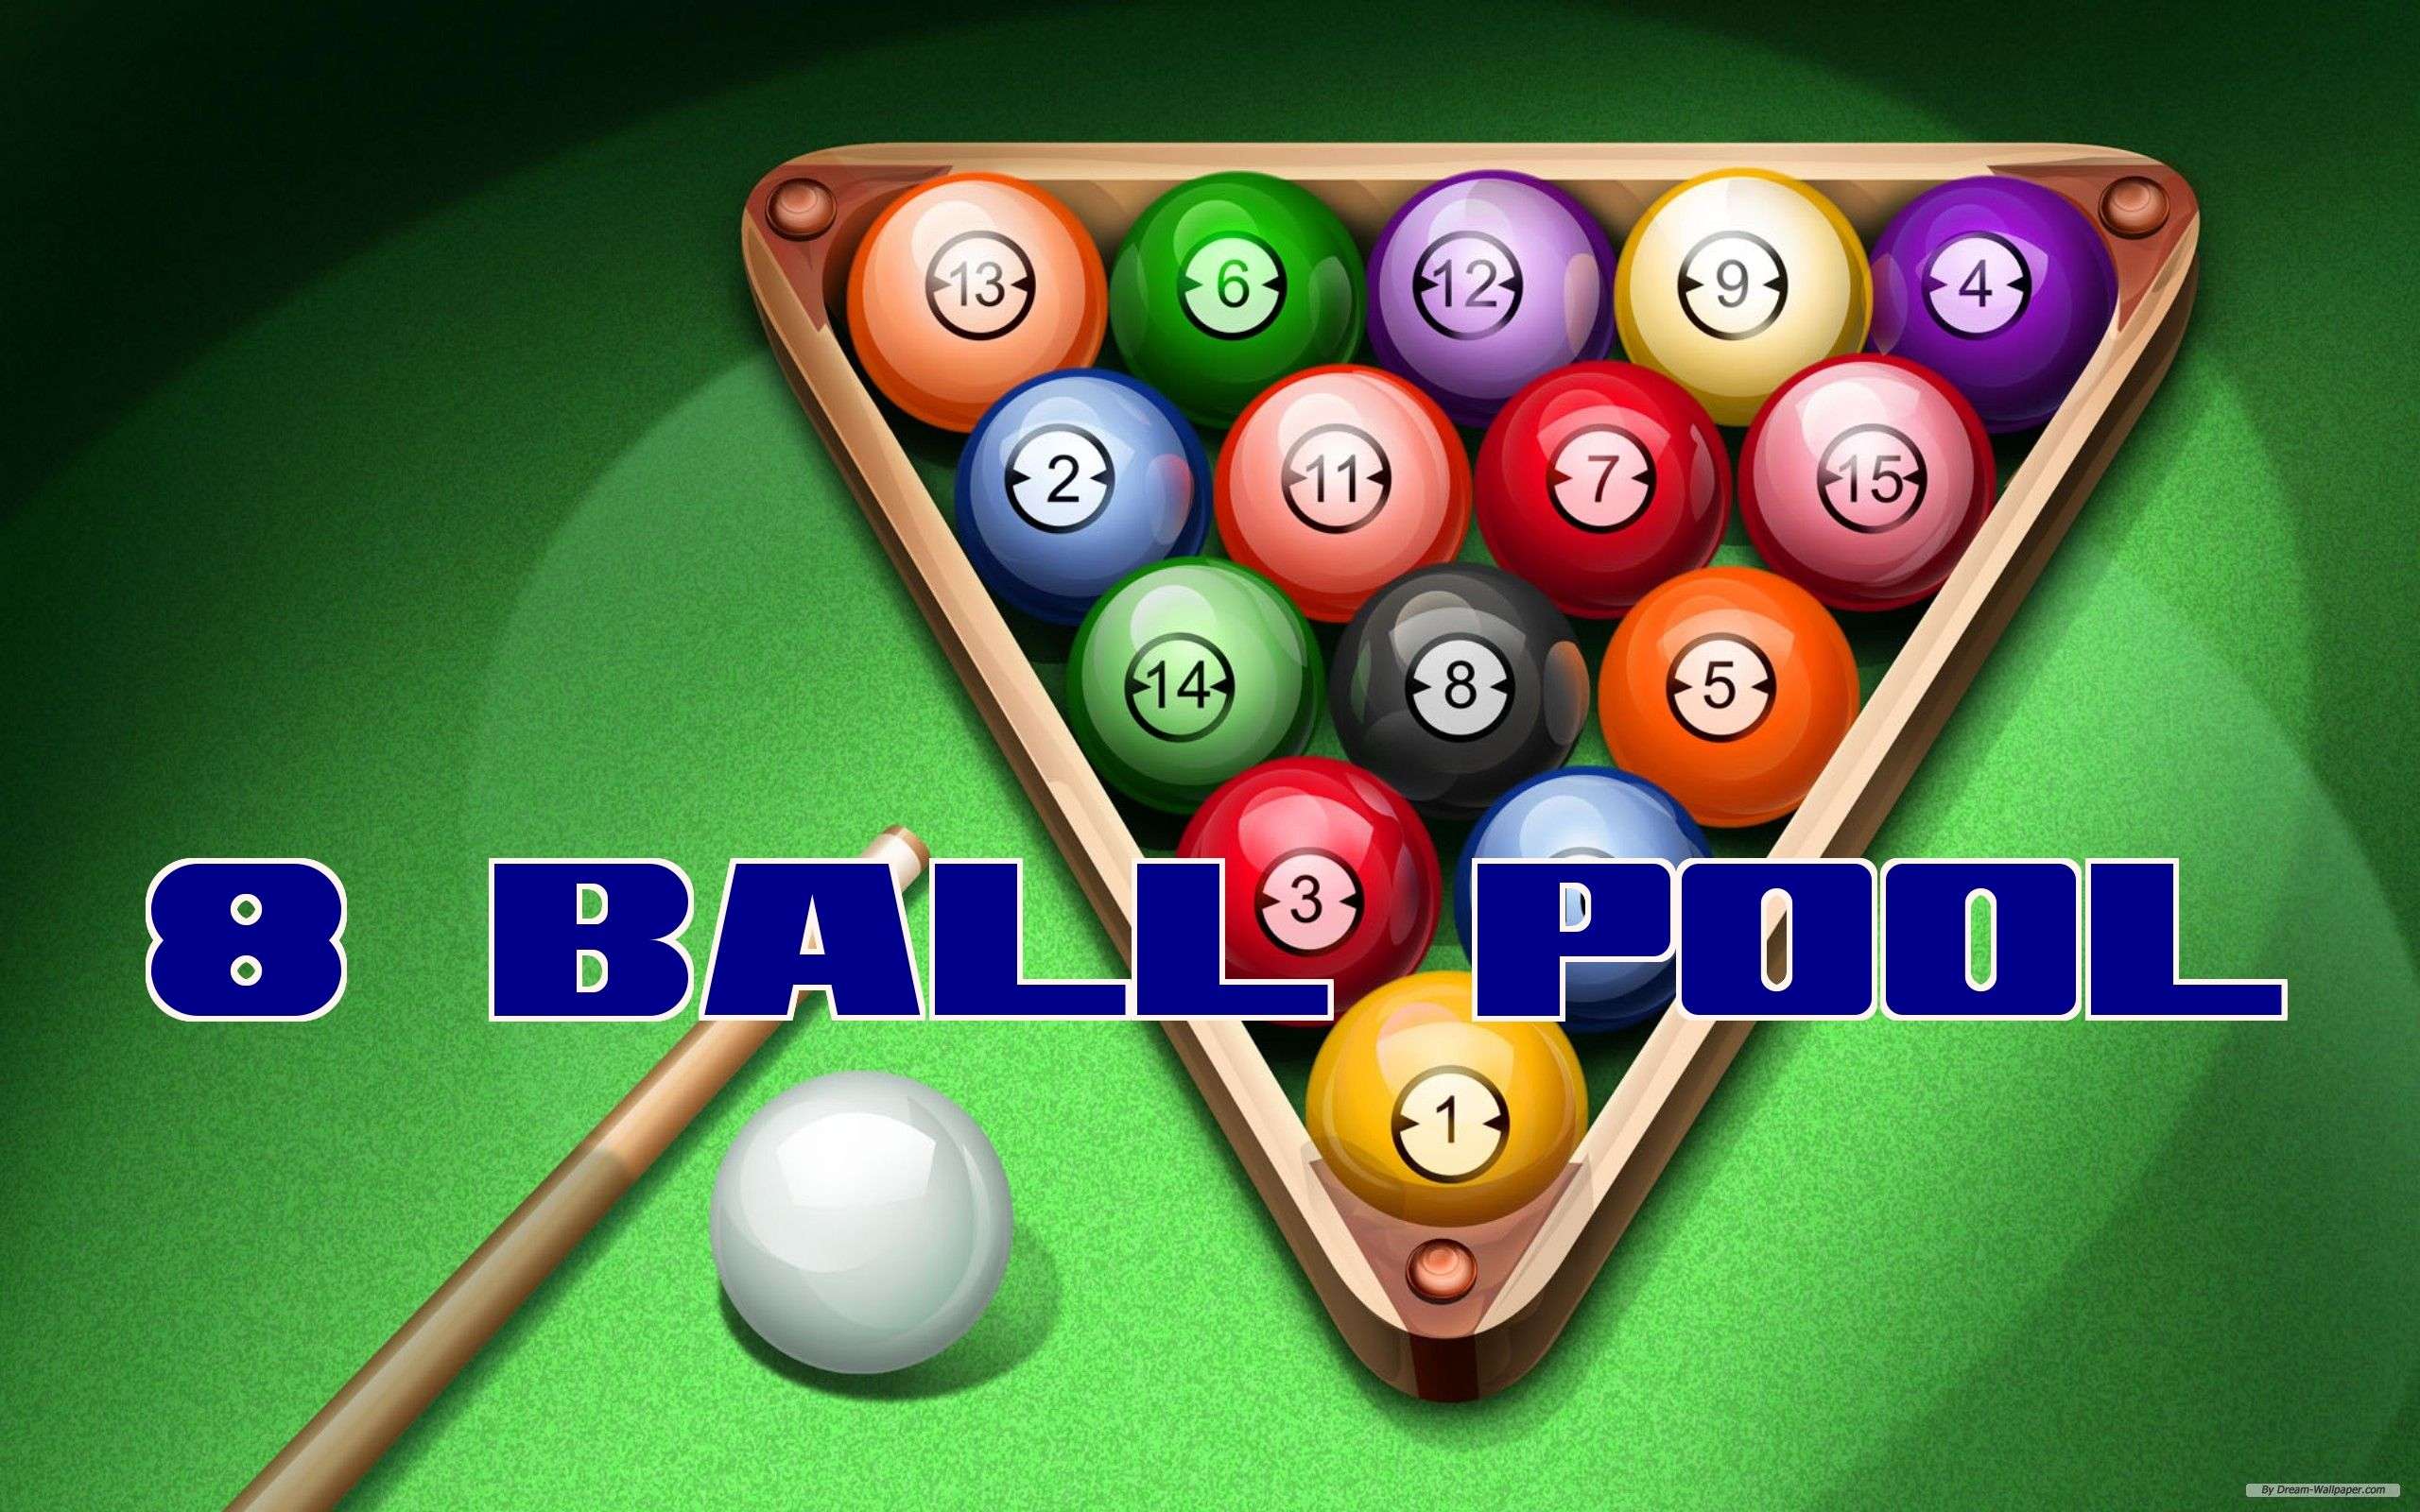 How To Play 8 Ball Pool With Friends